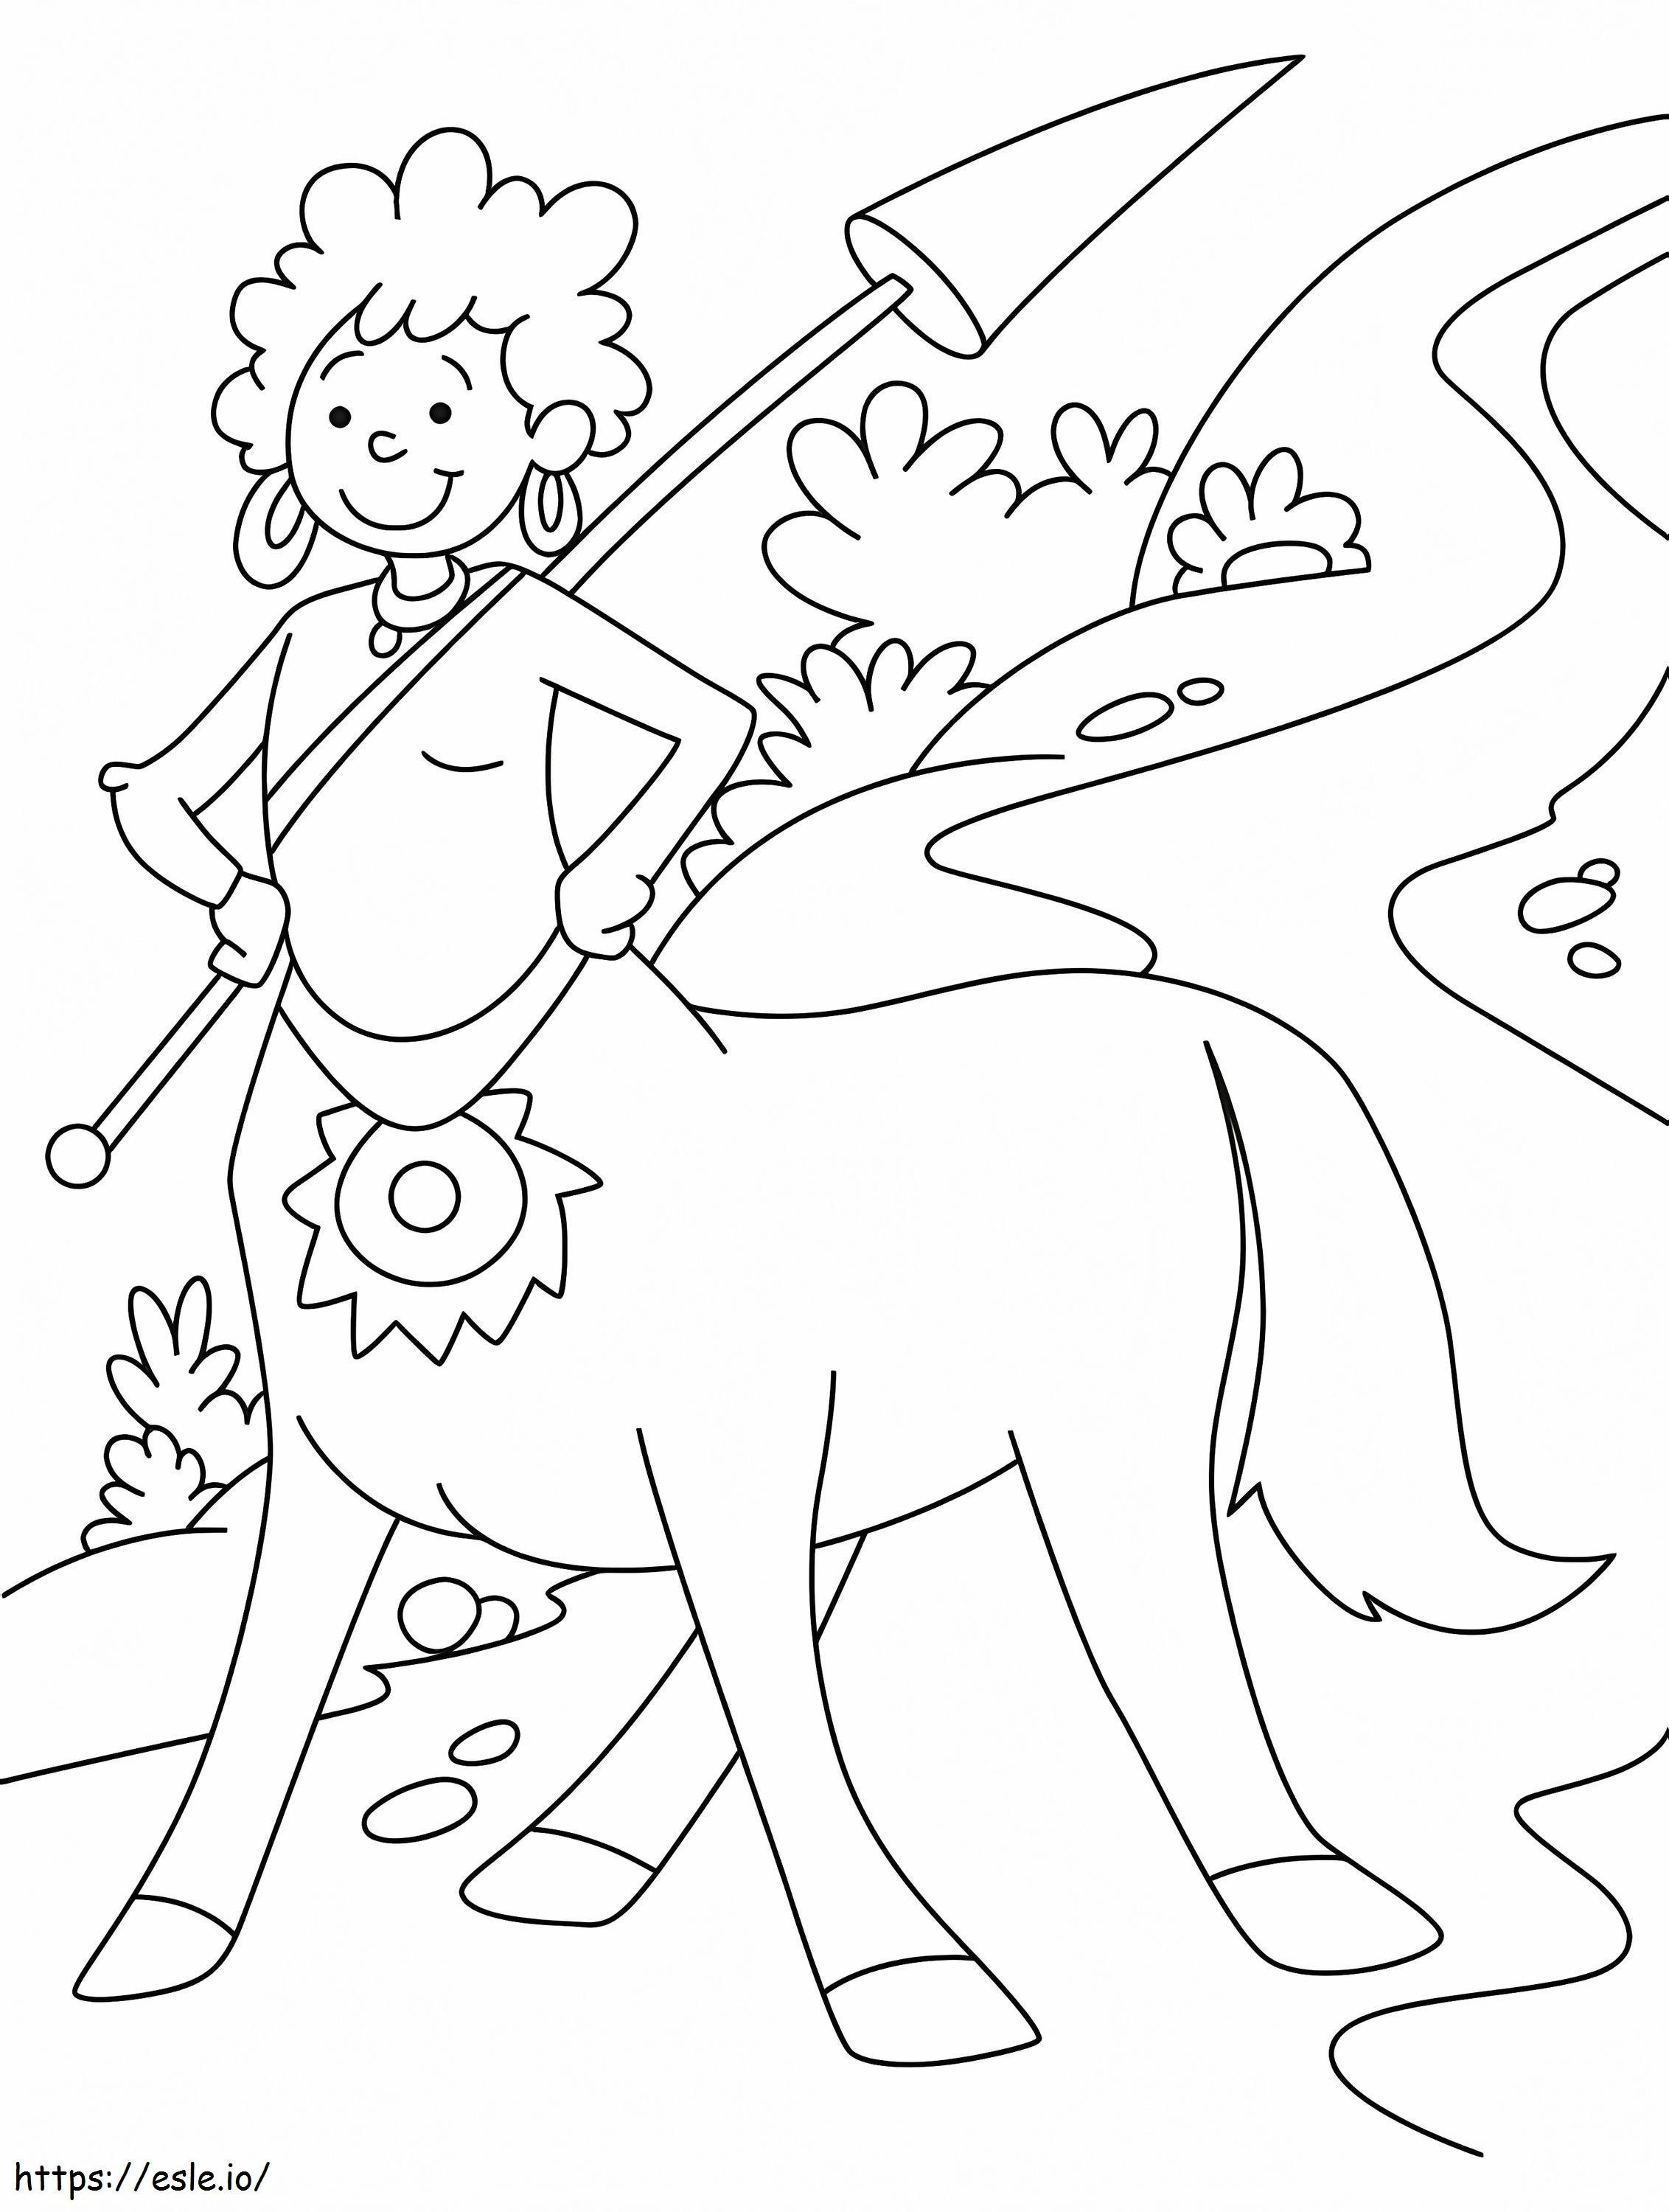 Centaur Smiling coloring page